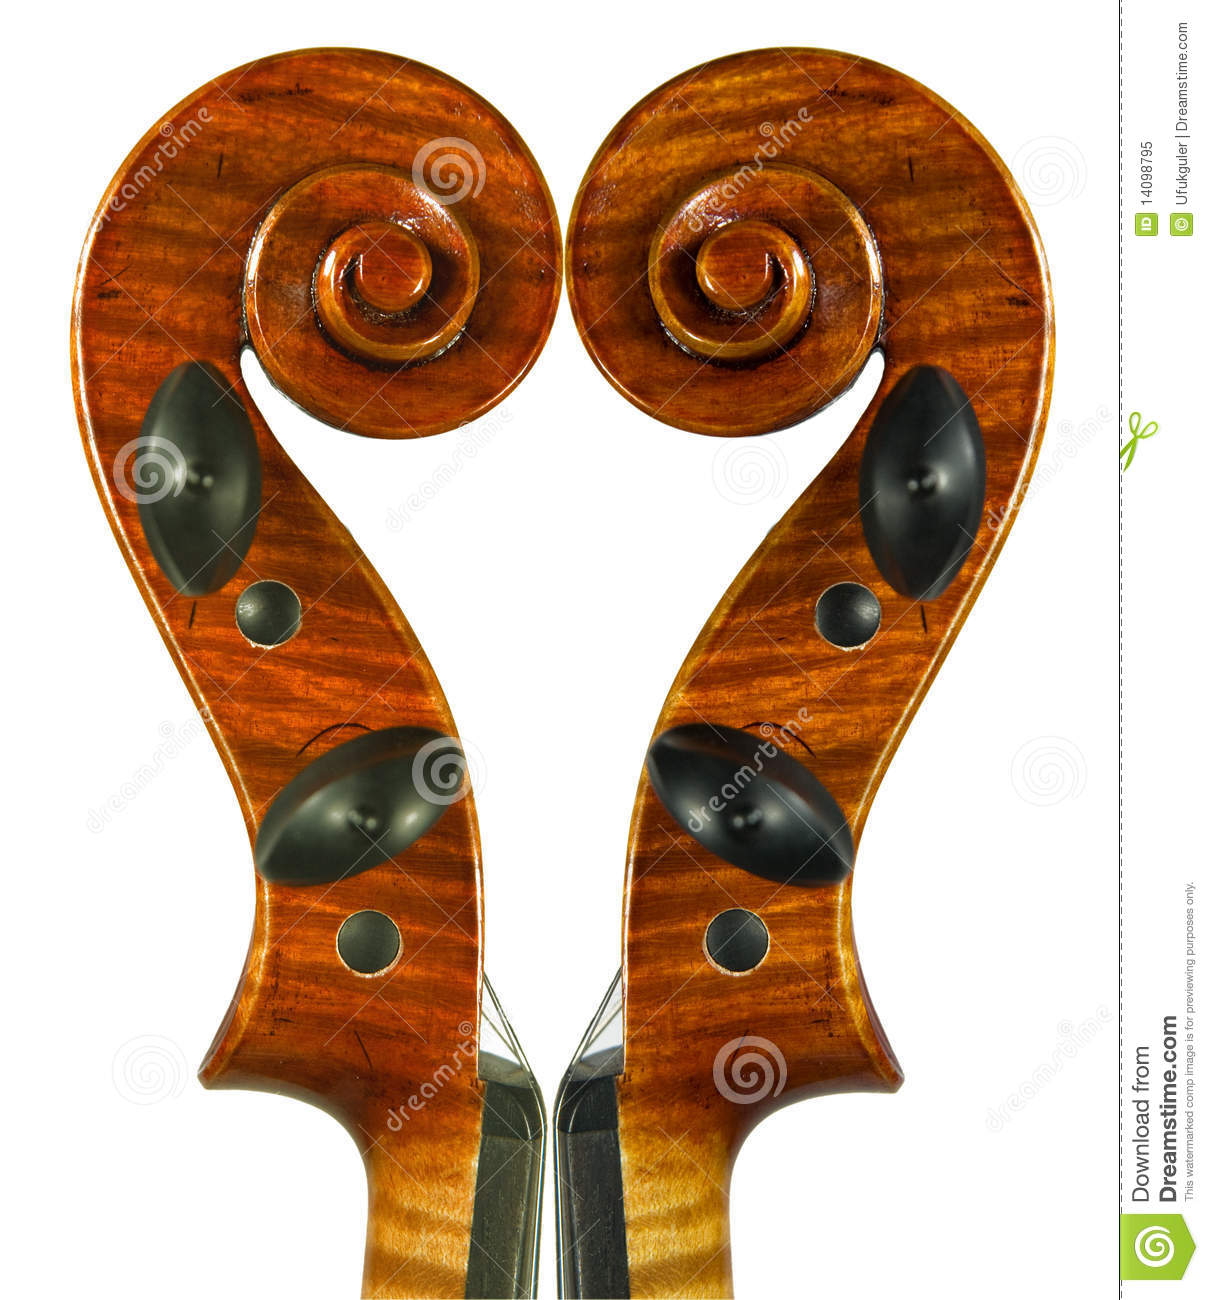 Image Of The Violin Scrolls Was Created From Only One Scroll